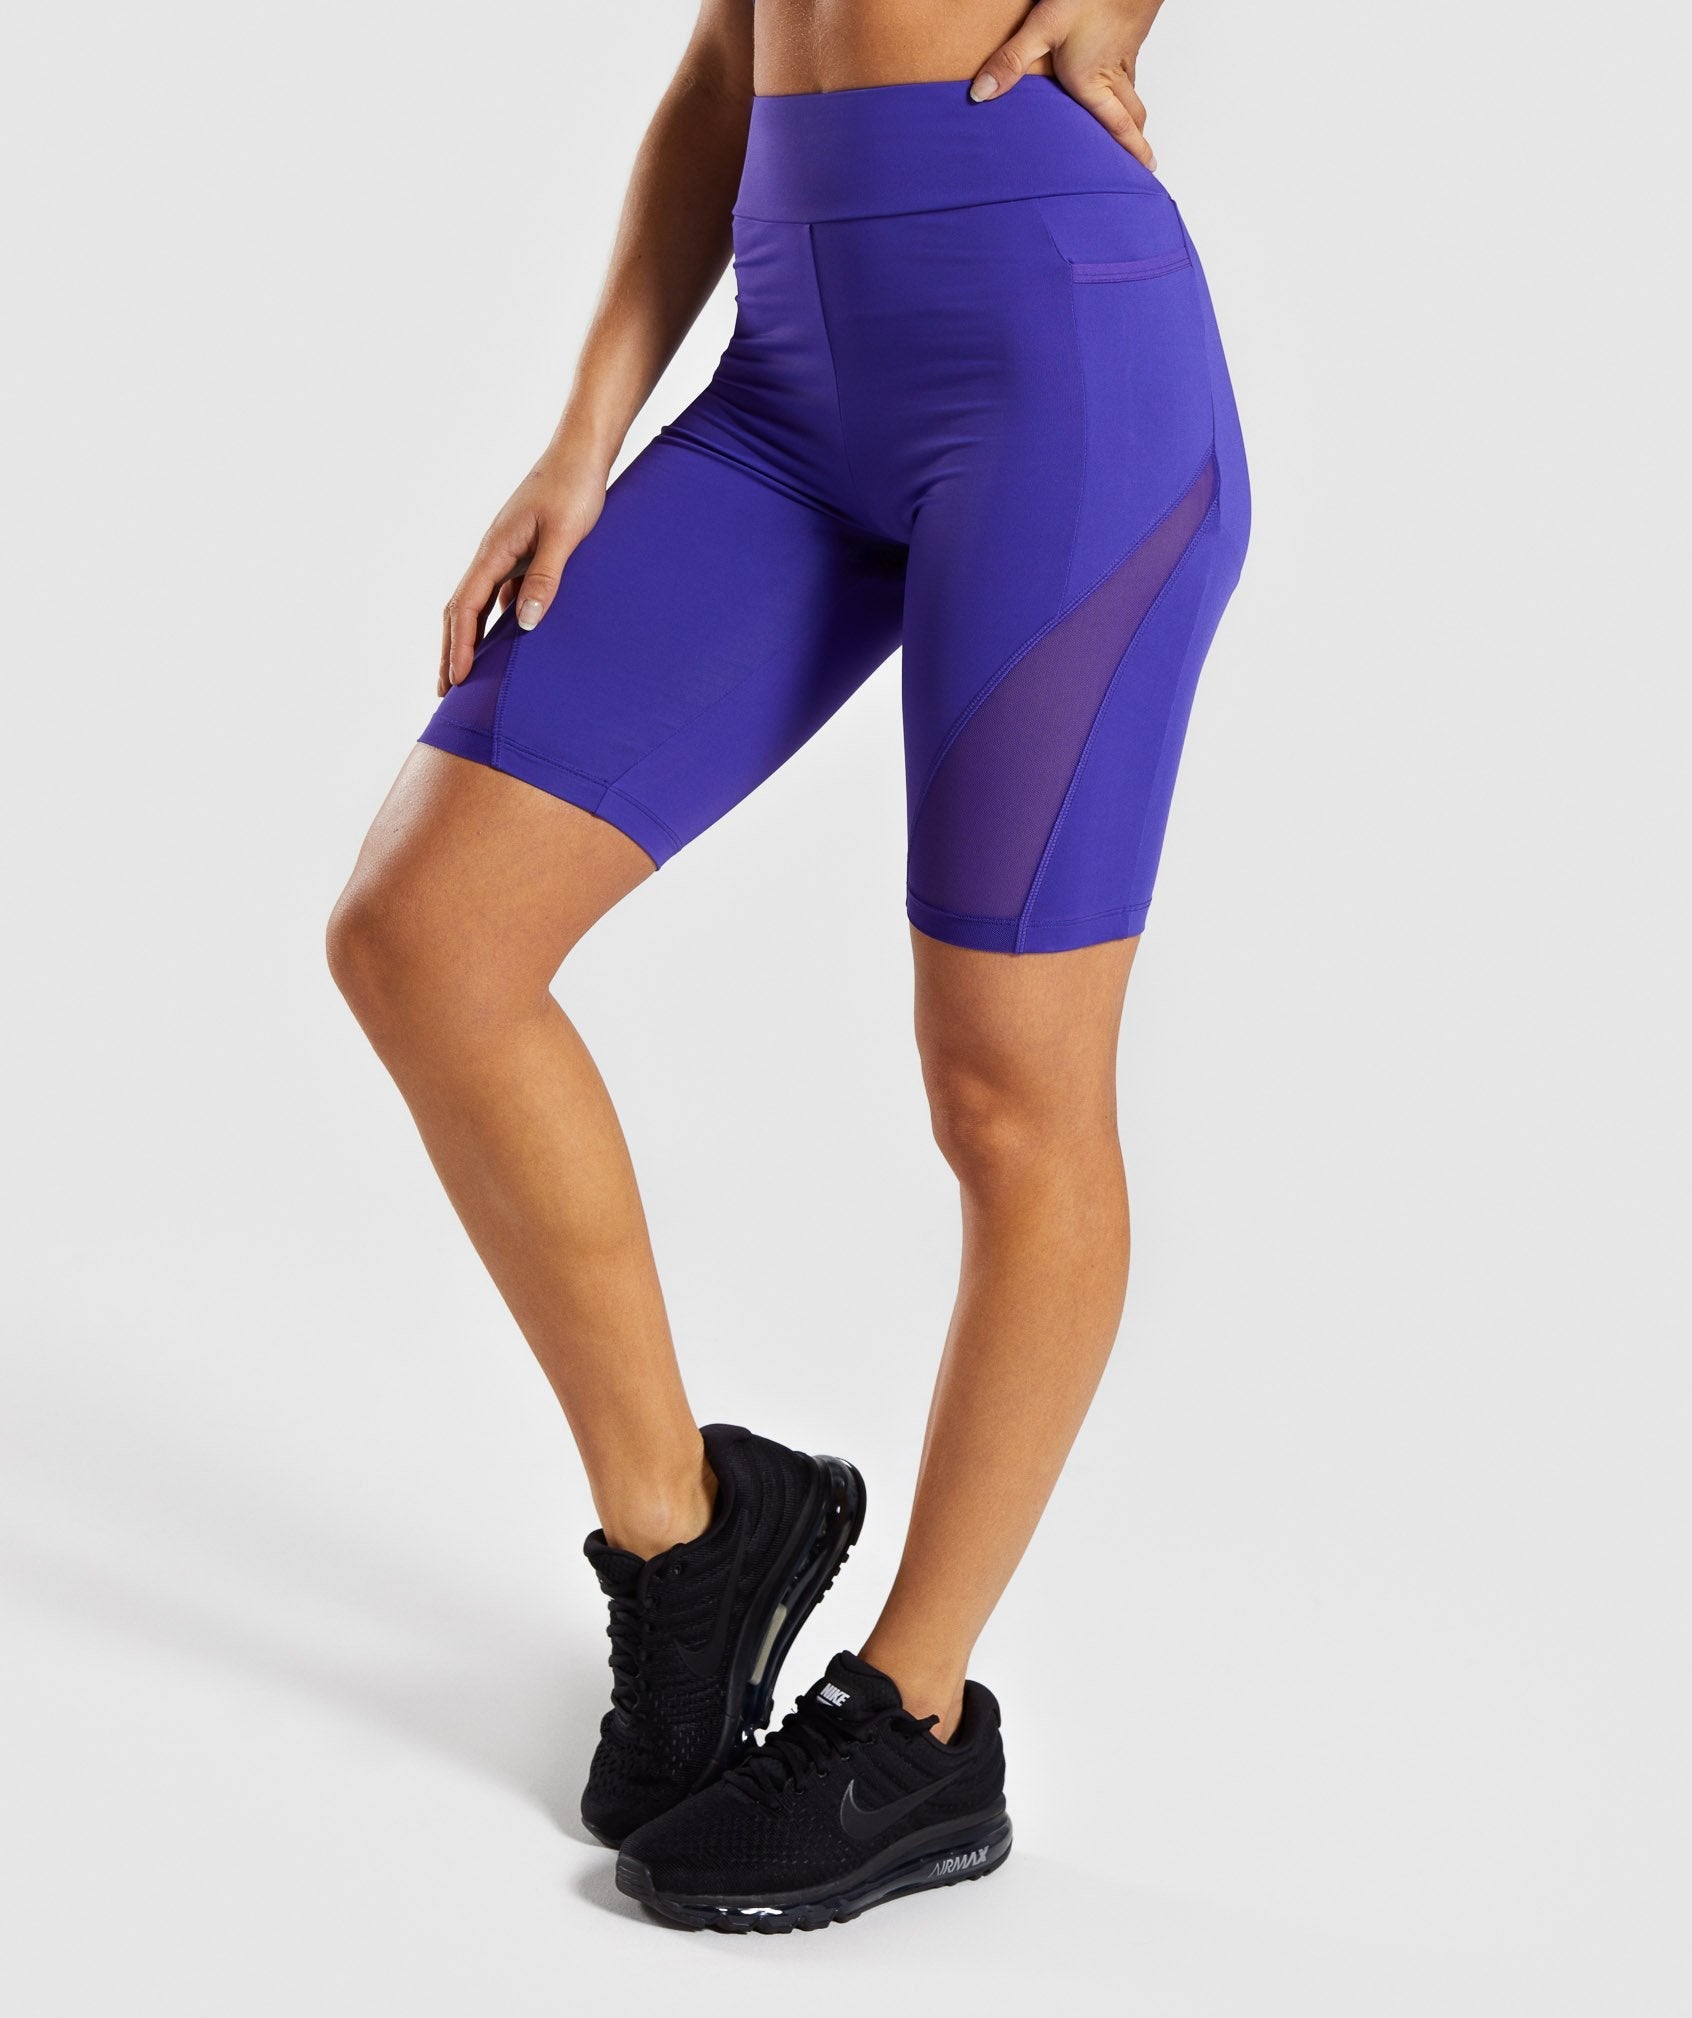 Elevate Cycling Short in Indigo - view 3